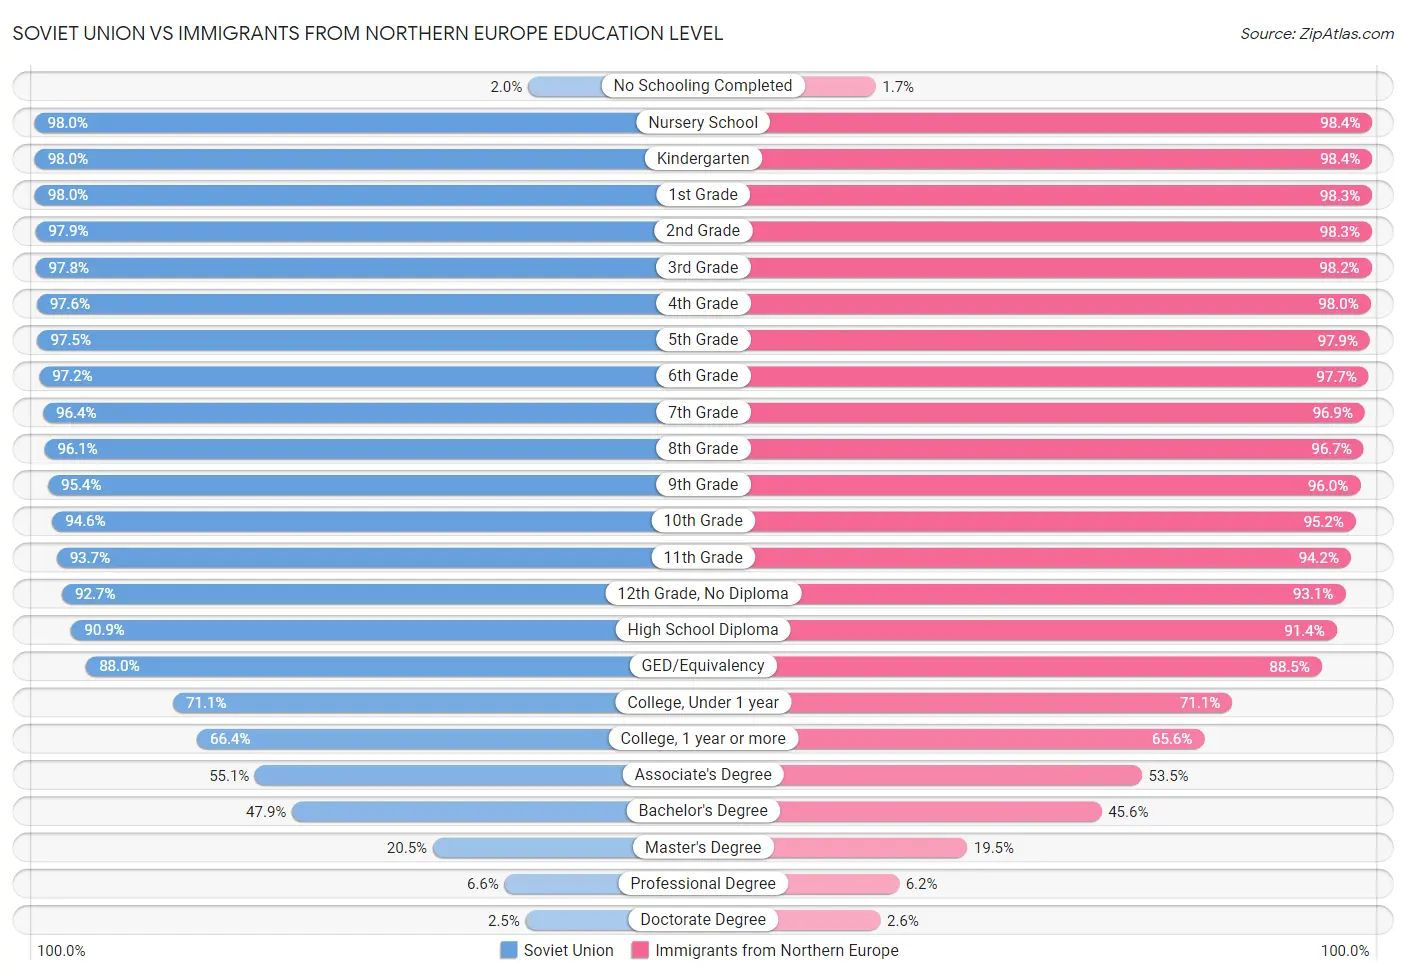 Soviet Union vs Immigrants from Northern Europe Education Level